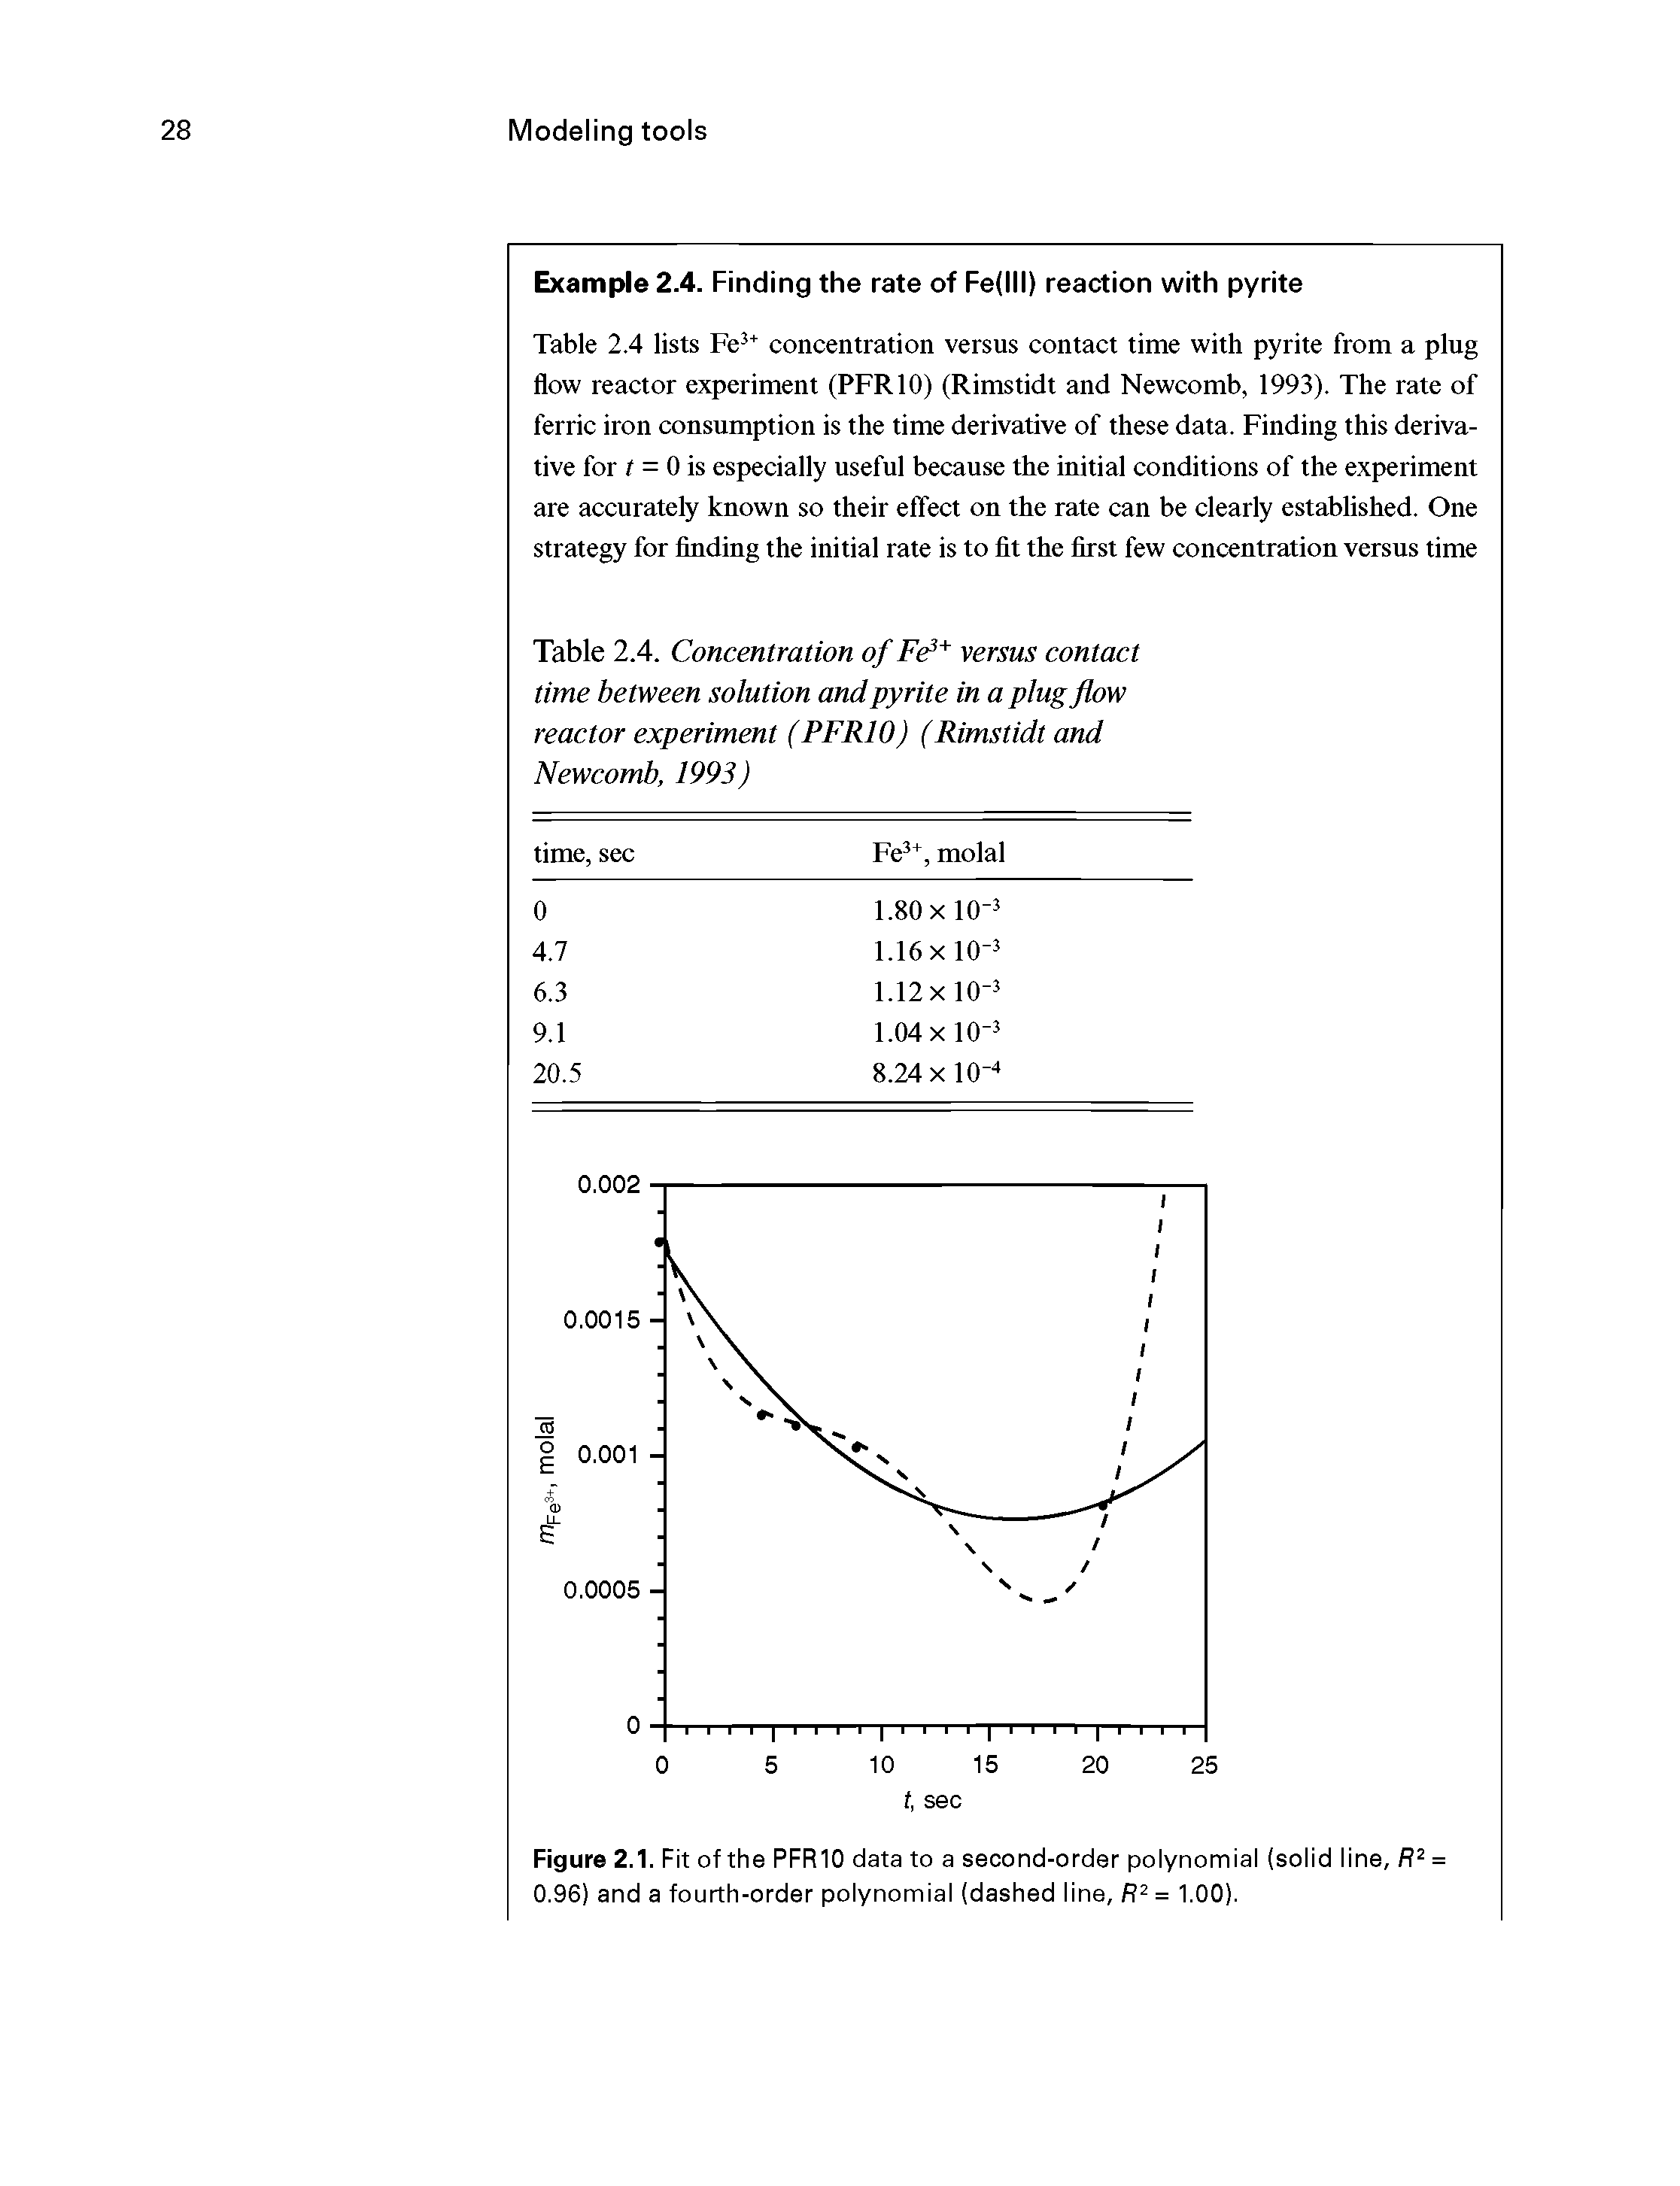 Table 2.4. Concentration of FC versus contact time between solution and pyrite in a plug flow reactor experiment (PFRlO) (Rimstidt and Newcomb, 1993)...